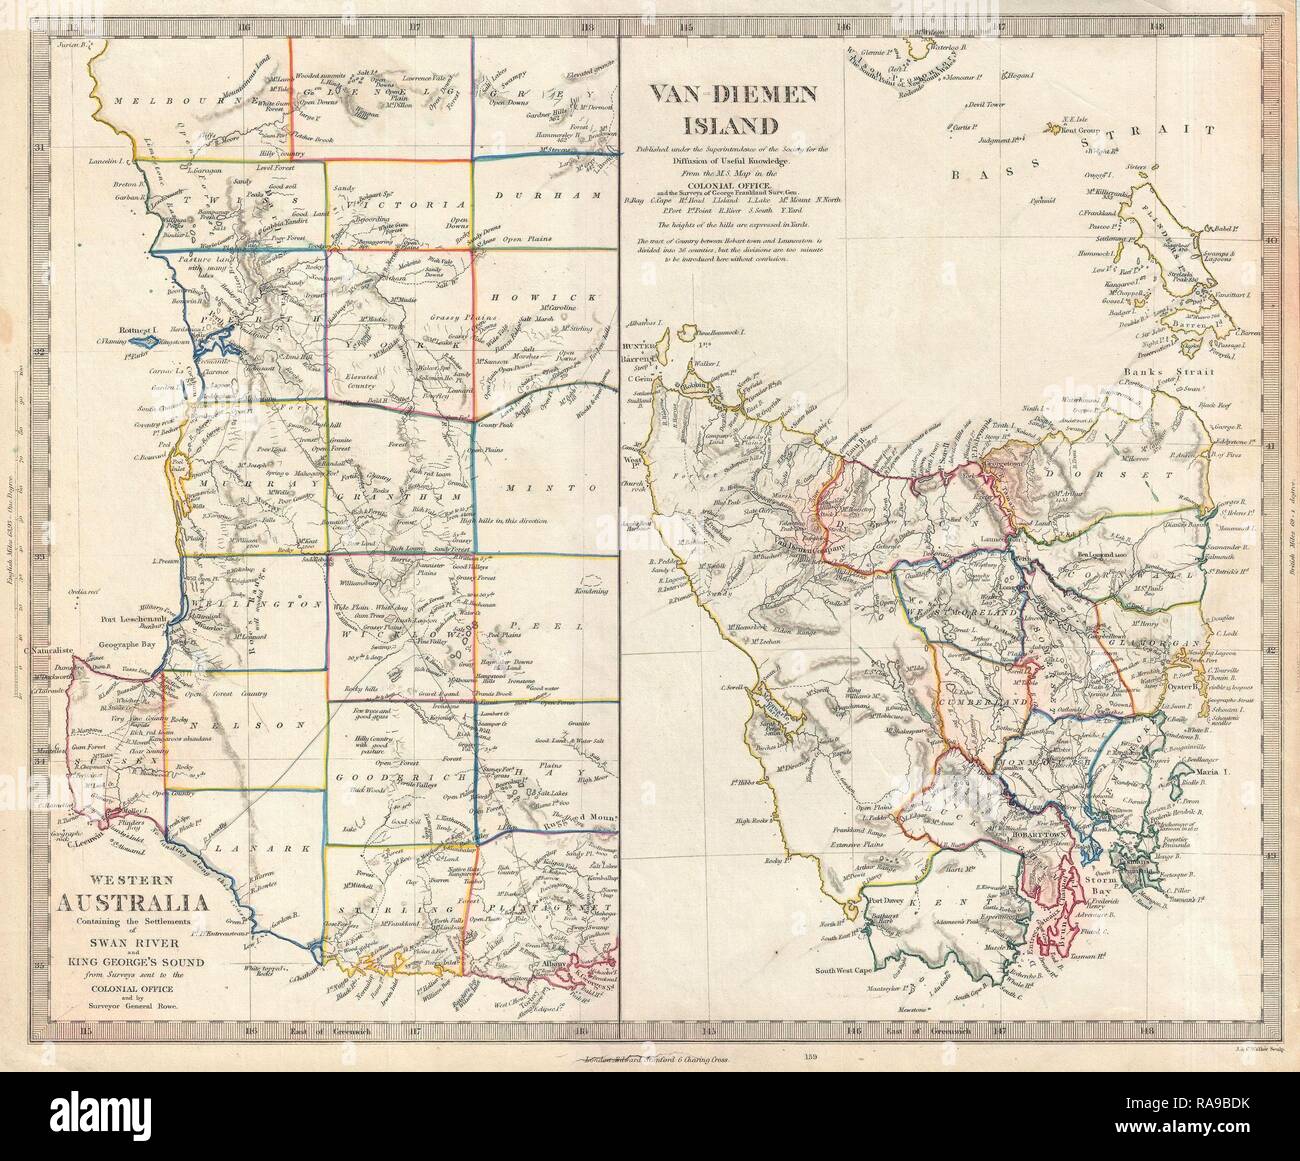 1849, S.D.U.K. Map of Tasmania or Van Diemen's Land and Western Australia. Reimagined by Gibon. Classic art with a reimagined Stock Photo